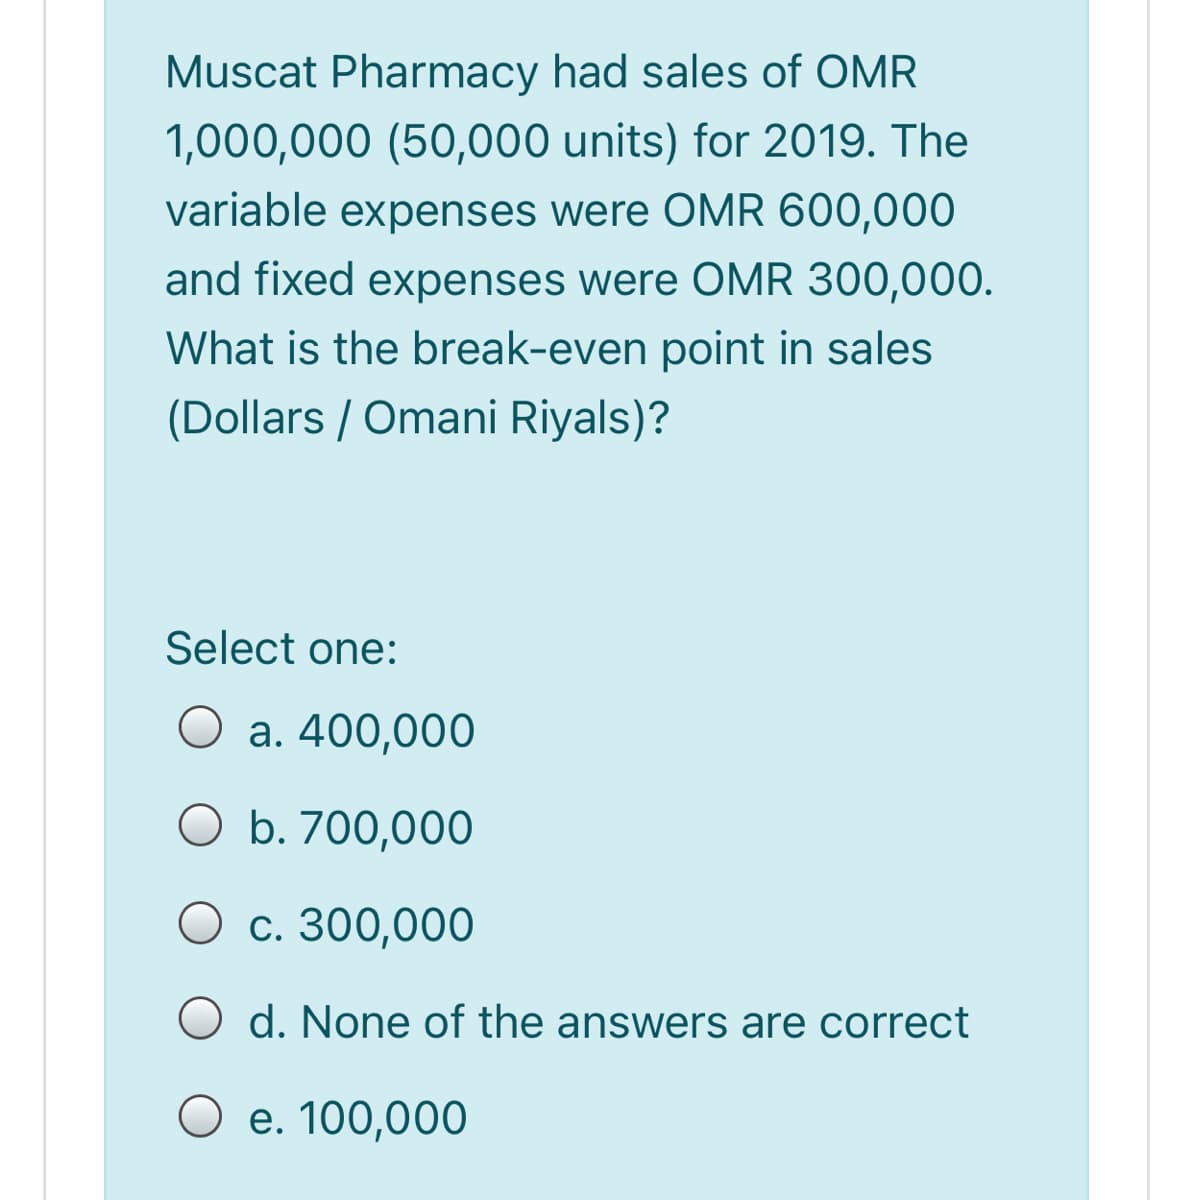 Muscat Pharmacy had sales of OMR
1,000,000 (50,000 units) for 2019. The
variable expenses were OMR 600,000
and fixed expenses were OMR 300,000.
What is the break-even point in sales
(Dollars / Omani Riyals)?
Select one:
O a. 400,000
O b. 700,000
O c. 300,000
O d. None of the answers are correct
O e. 100,000
